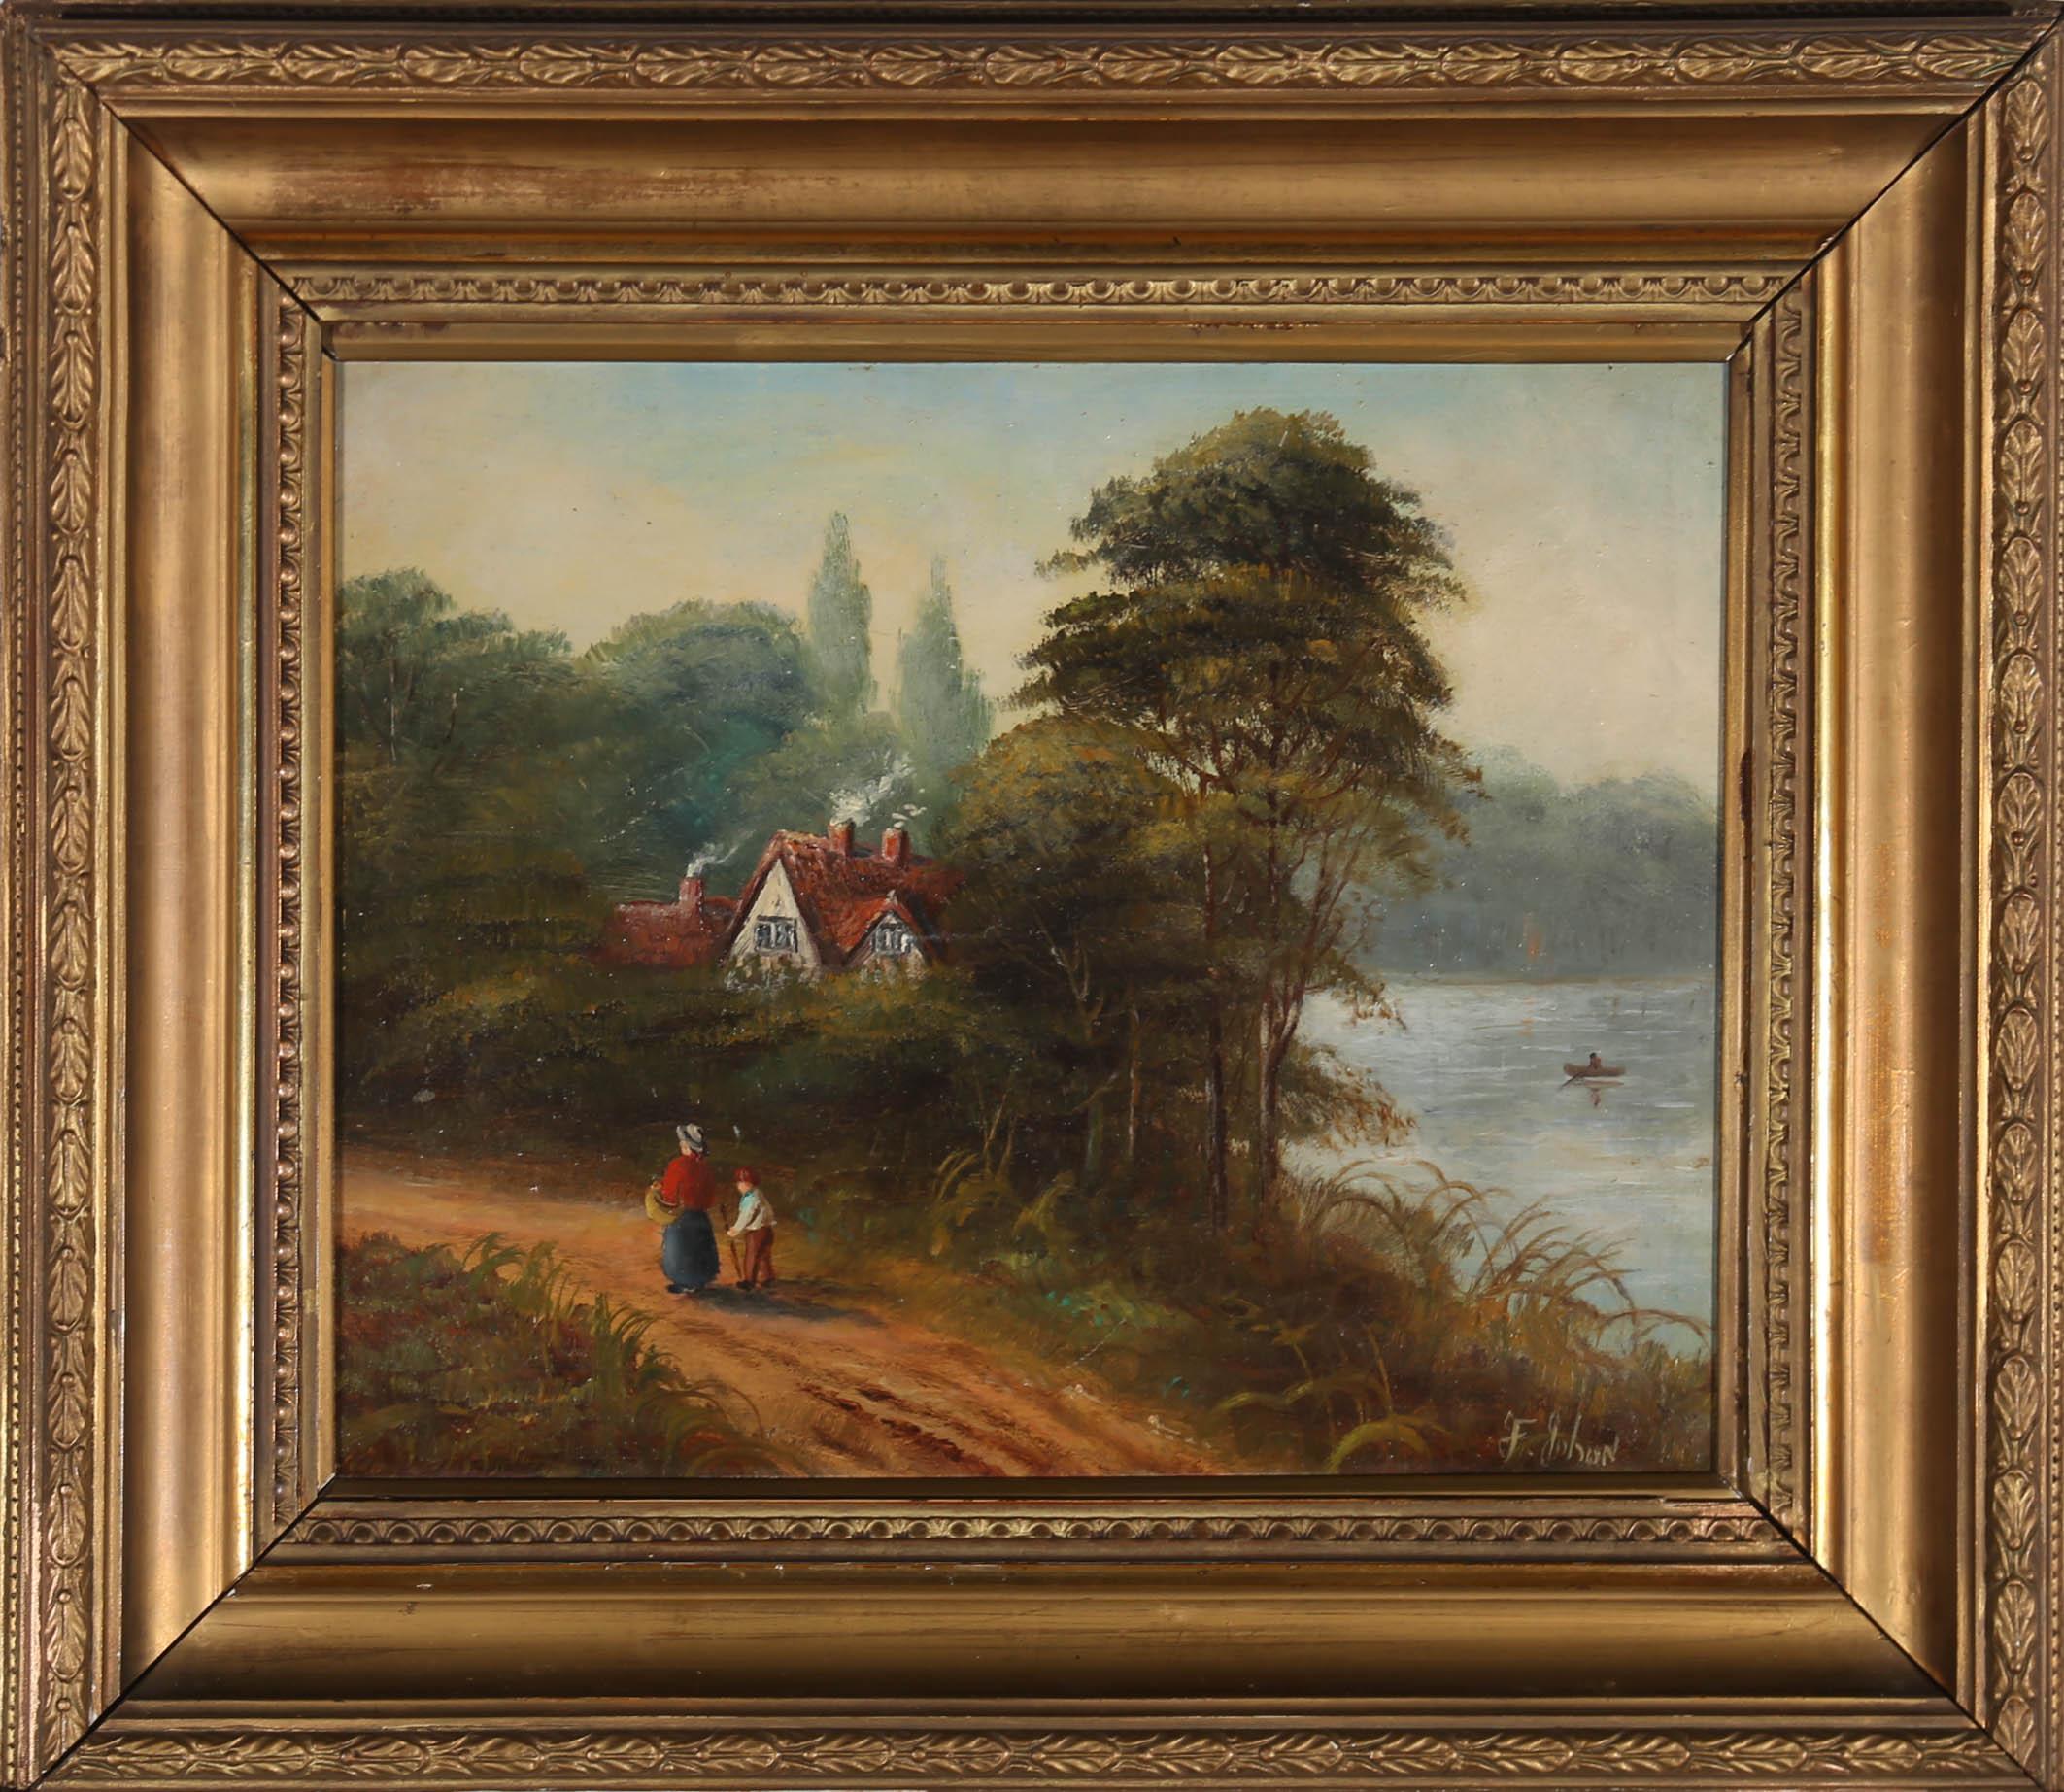 This beautiful late 19th century oil painting depicts a charming rural location, with figures on their way home after a quiet village stroll. To the far right of the painting a boatman can be seen rowing out on the water, while nestled in the trees